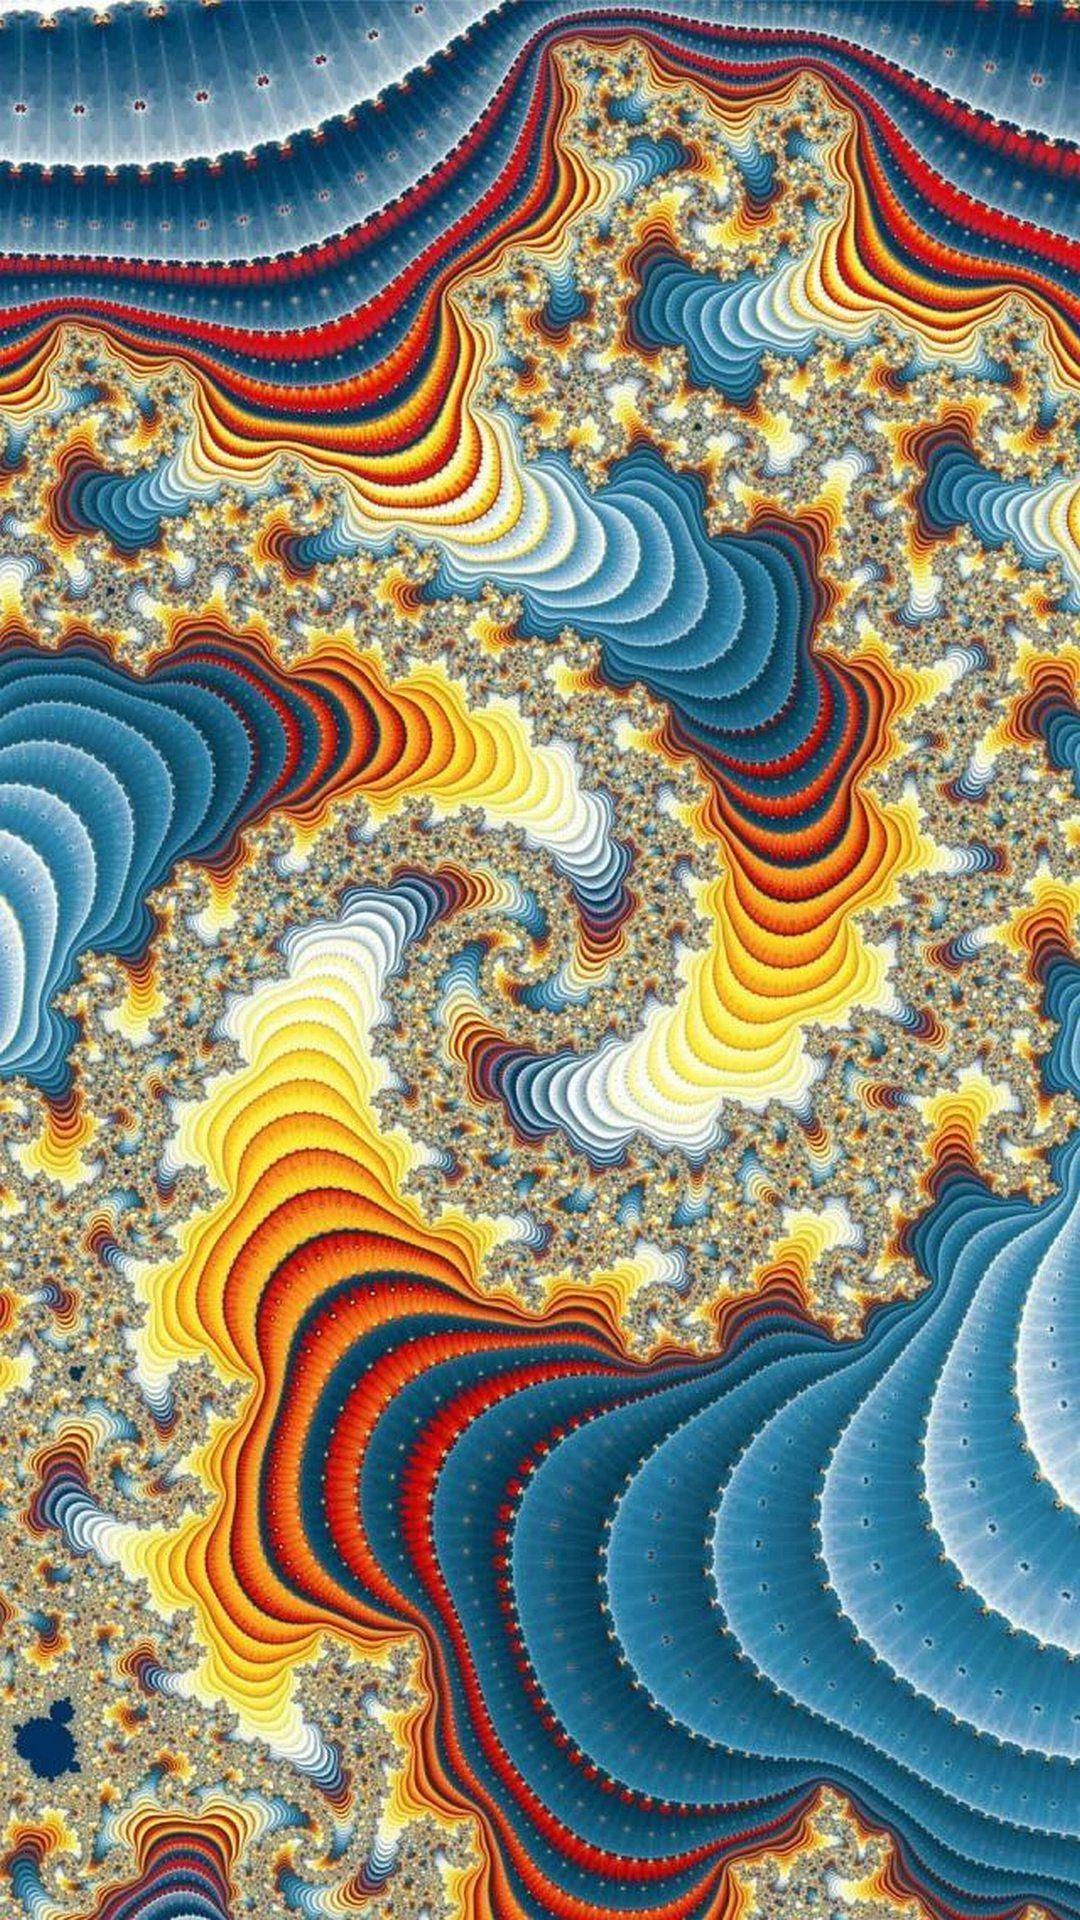 Trippy Wallpaper for iPhone iPhone 7 plus, iPhone 6 plus